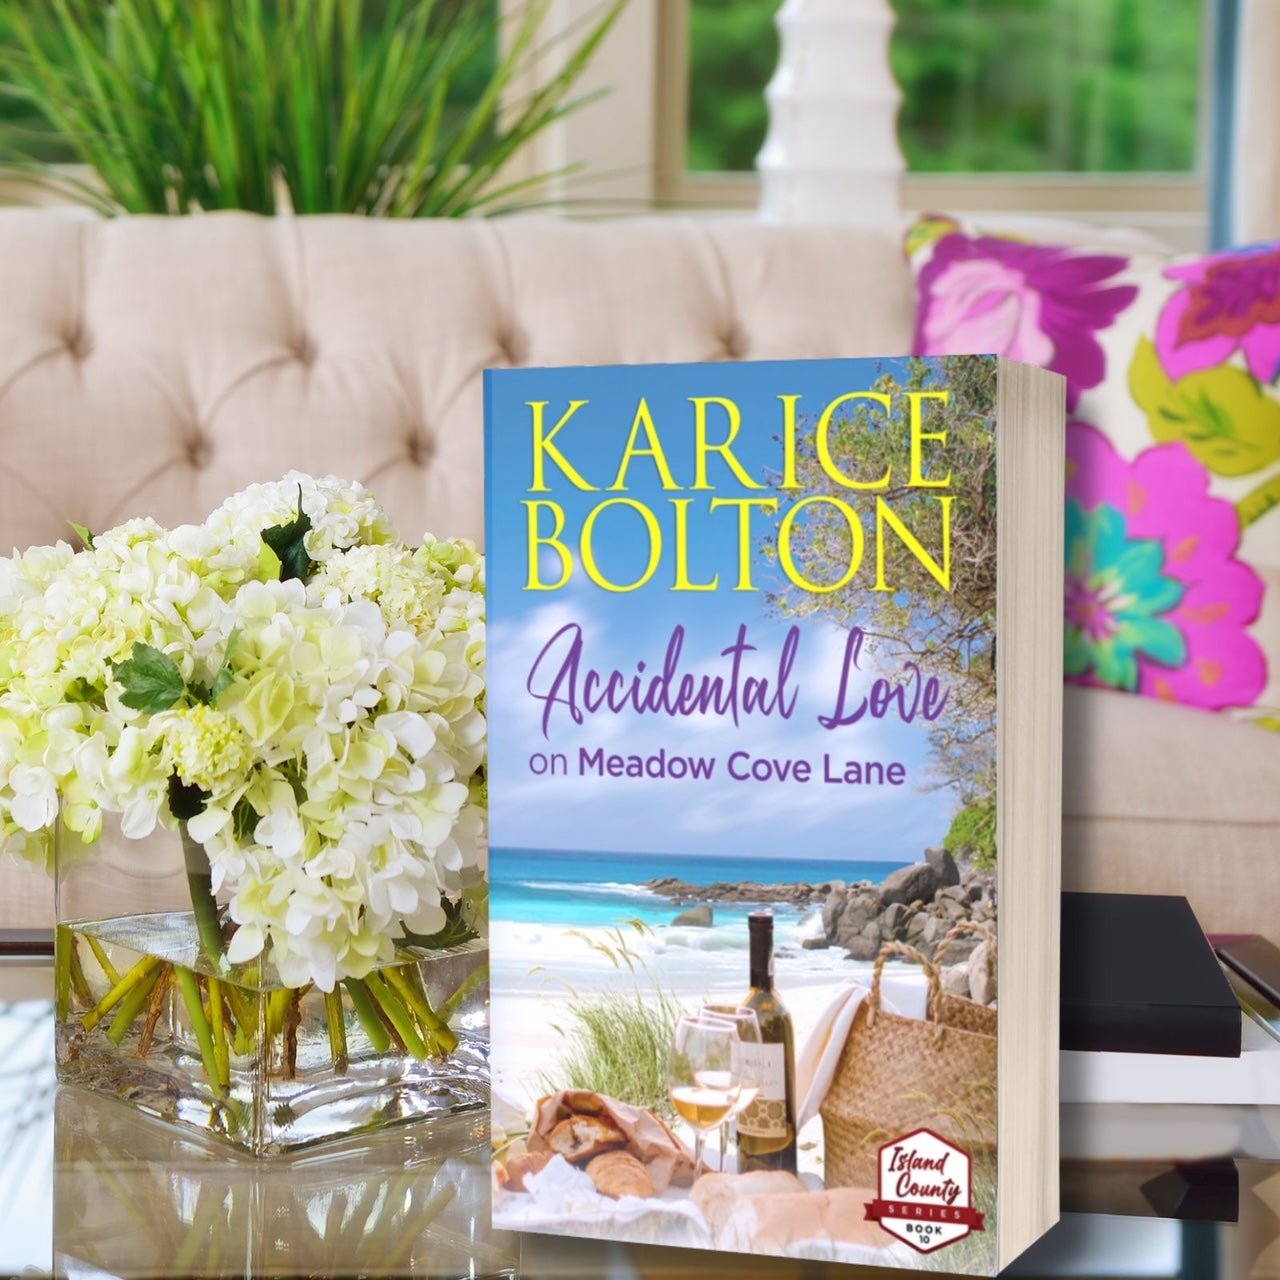 Accidental Love on Meadow Cove Lane